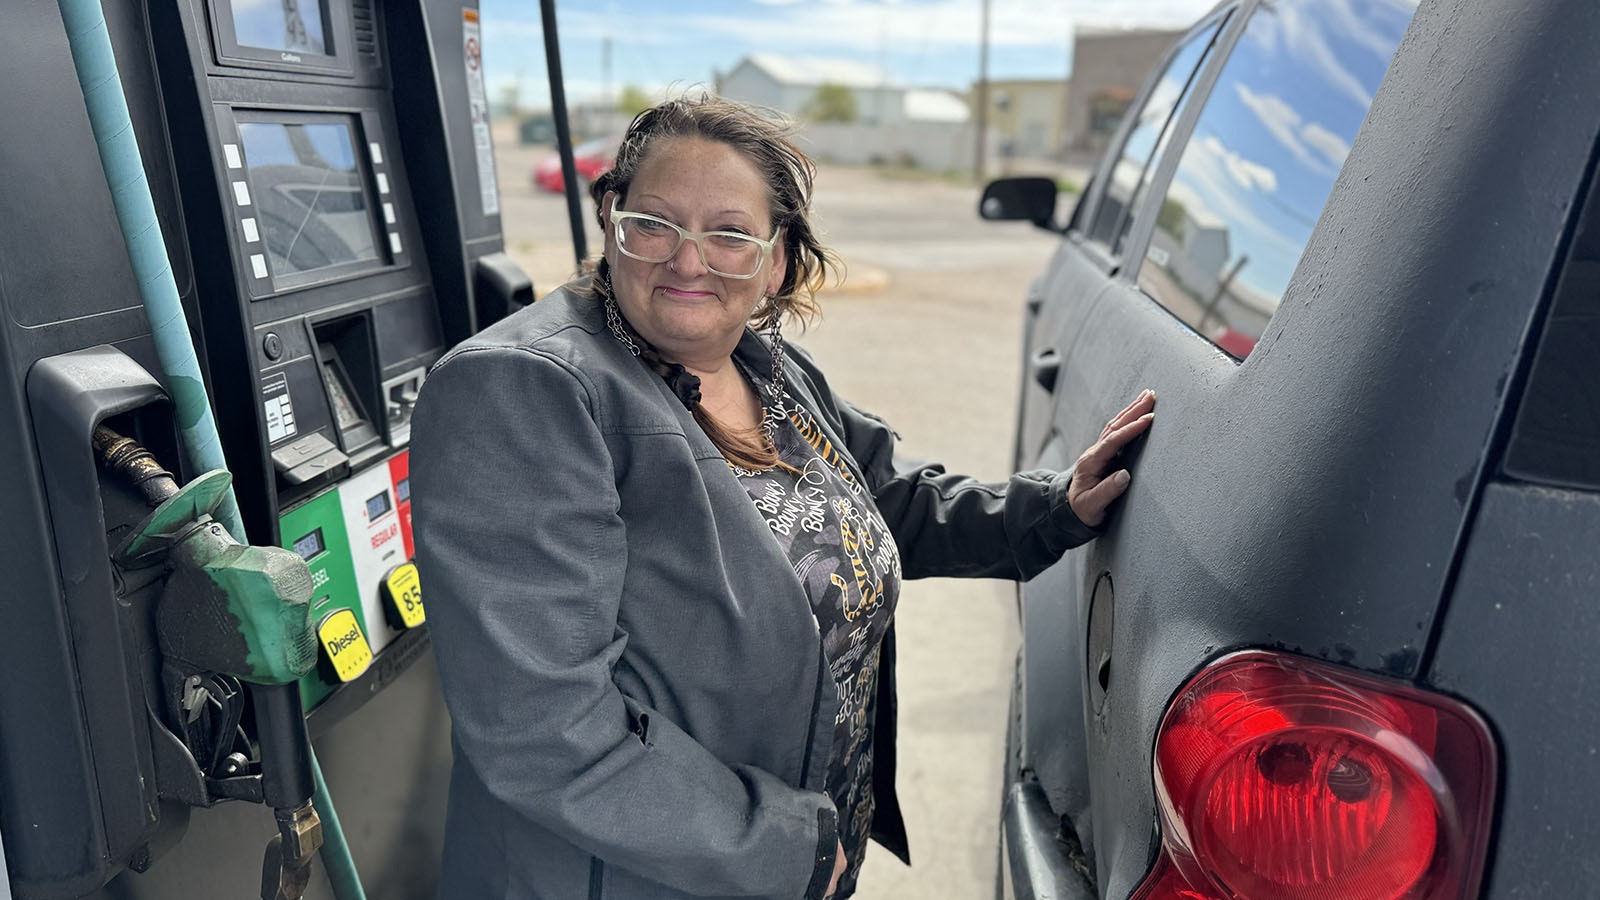 On Sunday morning, Cheyenne resident Lisia Shepard tried to get away with filling up a few extra 1-gallon gasoline cans in the back of her gas-guzzling Dodge Durango truck, but she was shut down. She stopped by the Hi Market gas station and convenience store along Lincolnway Blvd., in downtown Cheyenne to support Americans for Prosperity.